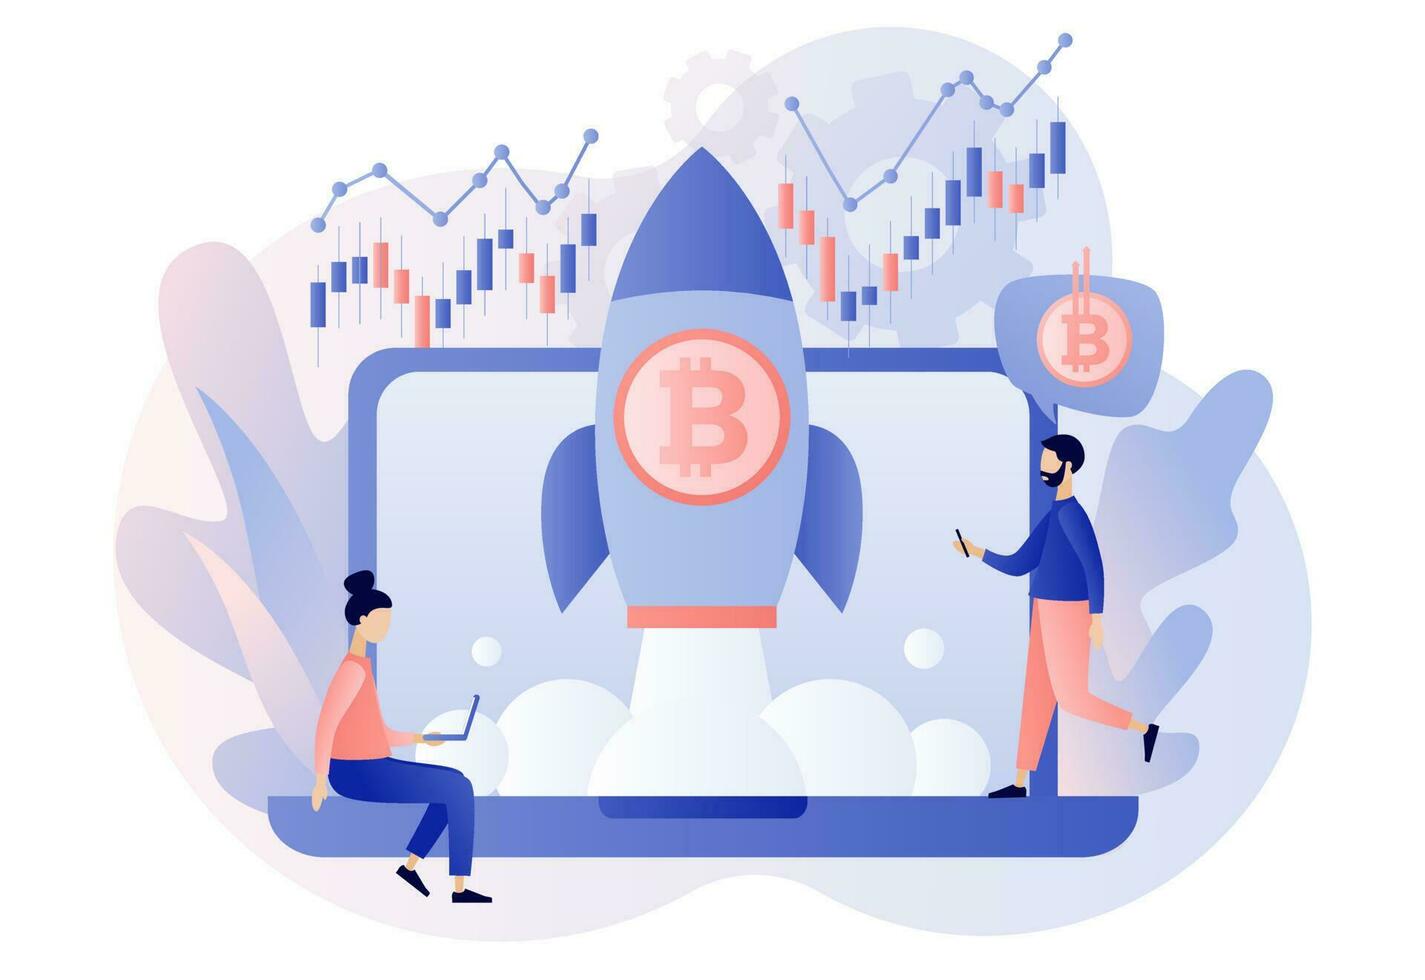 Bitcoin price skyrocket. Spaceship flying upwards. Bull market concept. Rate growth. Tiny people cryptocurrency investors online. Modern flat cartoon style. Vector illustration on white background